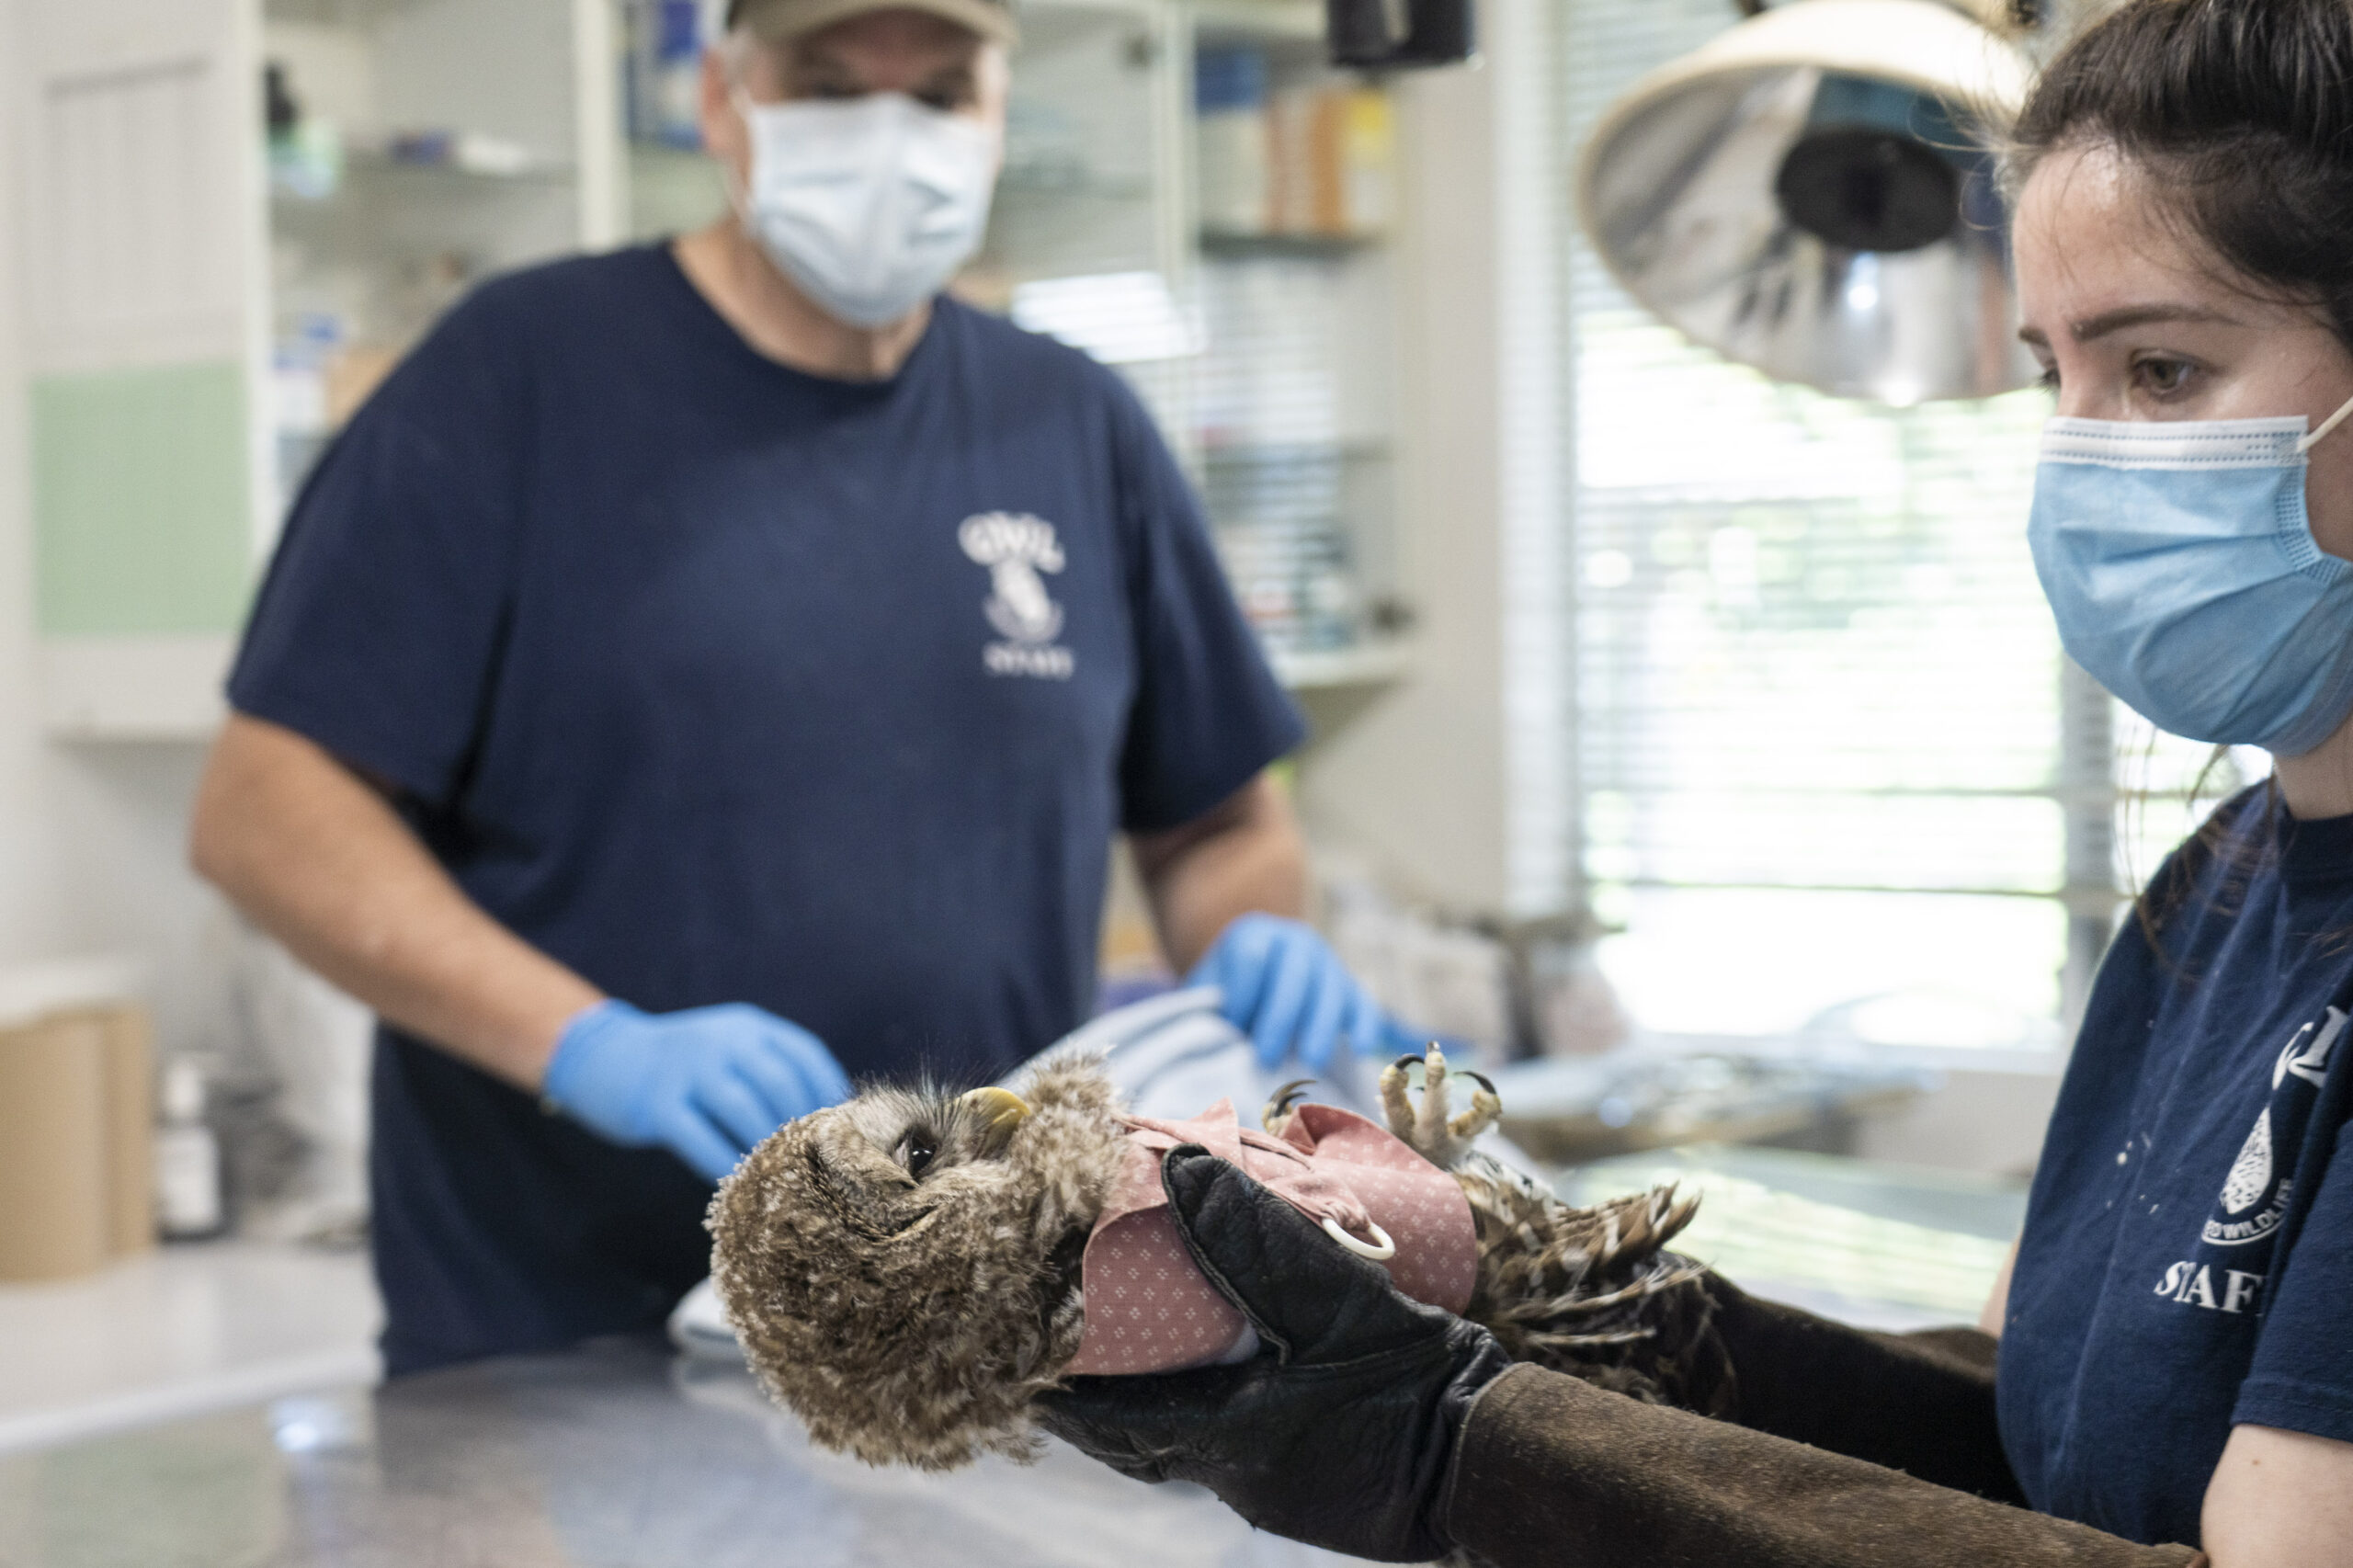 A staff member at the Orphaned Wildlife Rehabilitation Society carries a juvenile barred owl that's wrapped in a piece of pink material, another staff member is seen in the background in a vet clinic. Both staff are wearing medical masks.